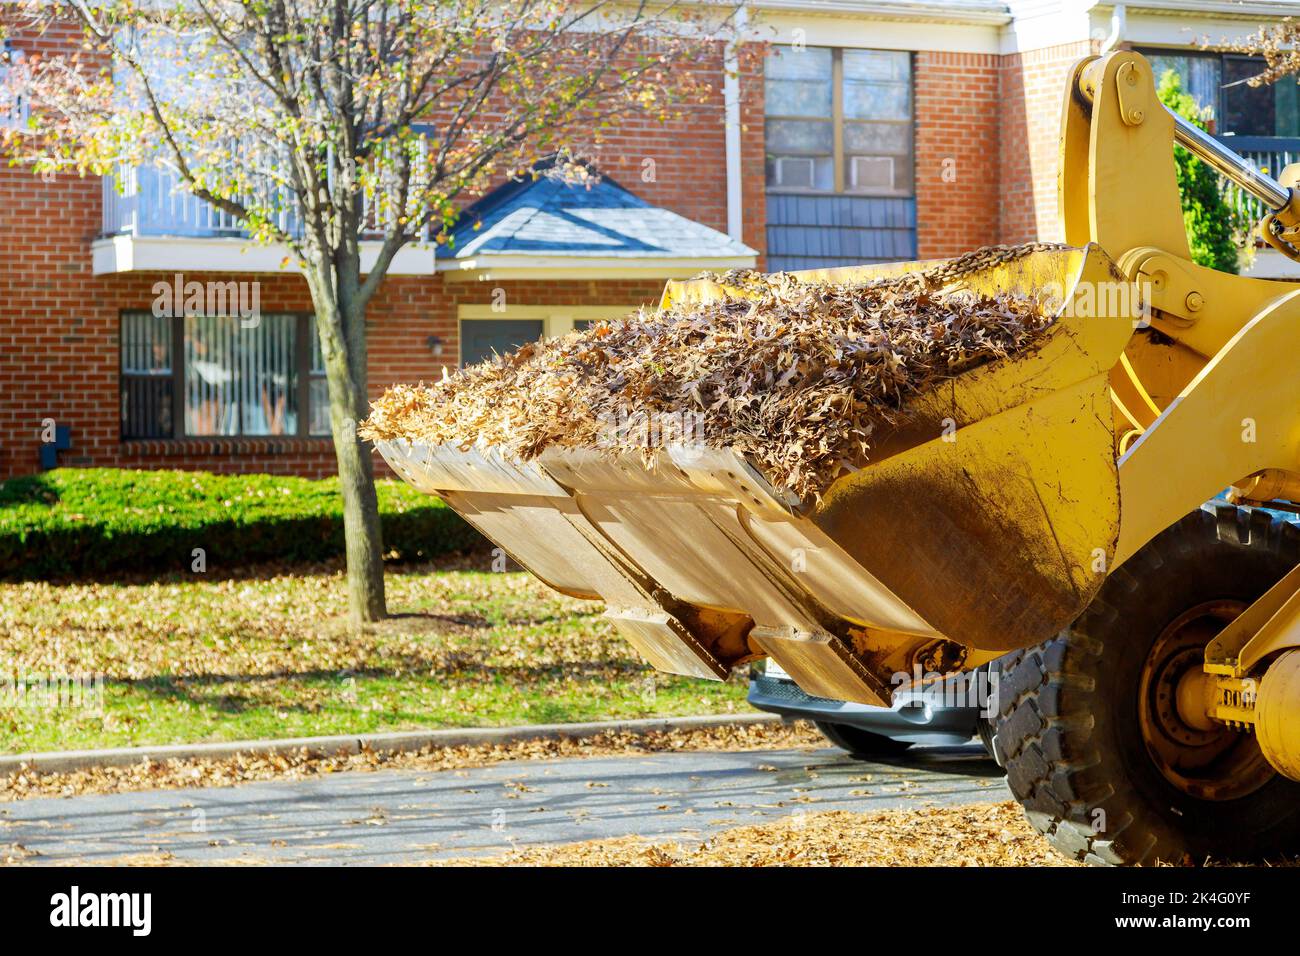 In autumn, municipal workers clean and remove fallen leaves near houses Stock Photo